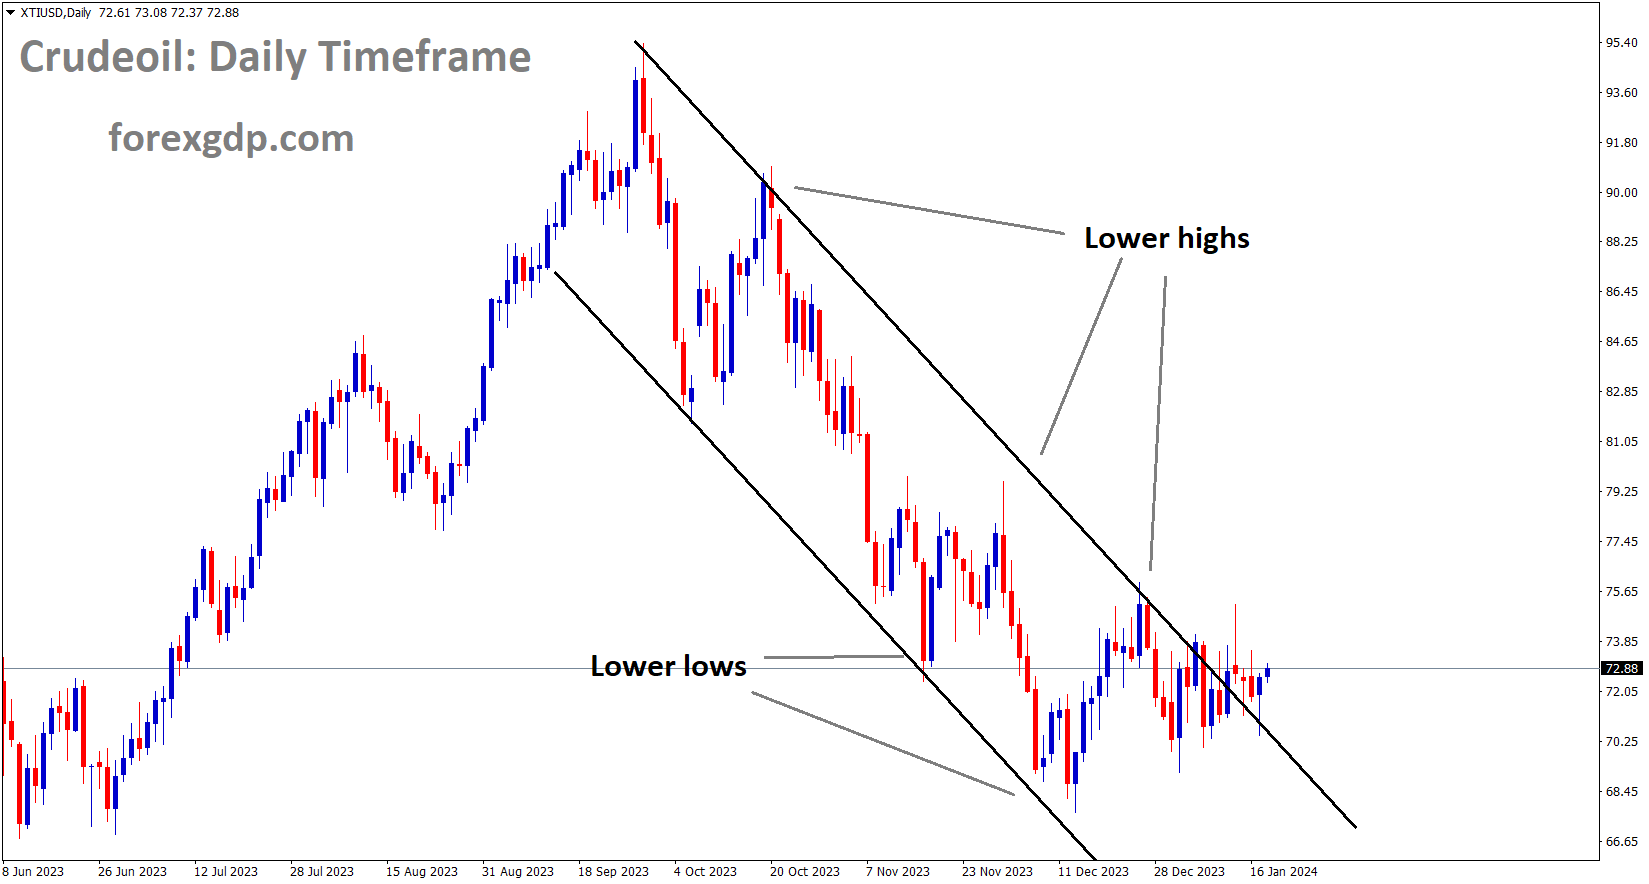 Crude oil price is moving in the Descending channel and the market has reached the lower high area of the channel